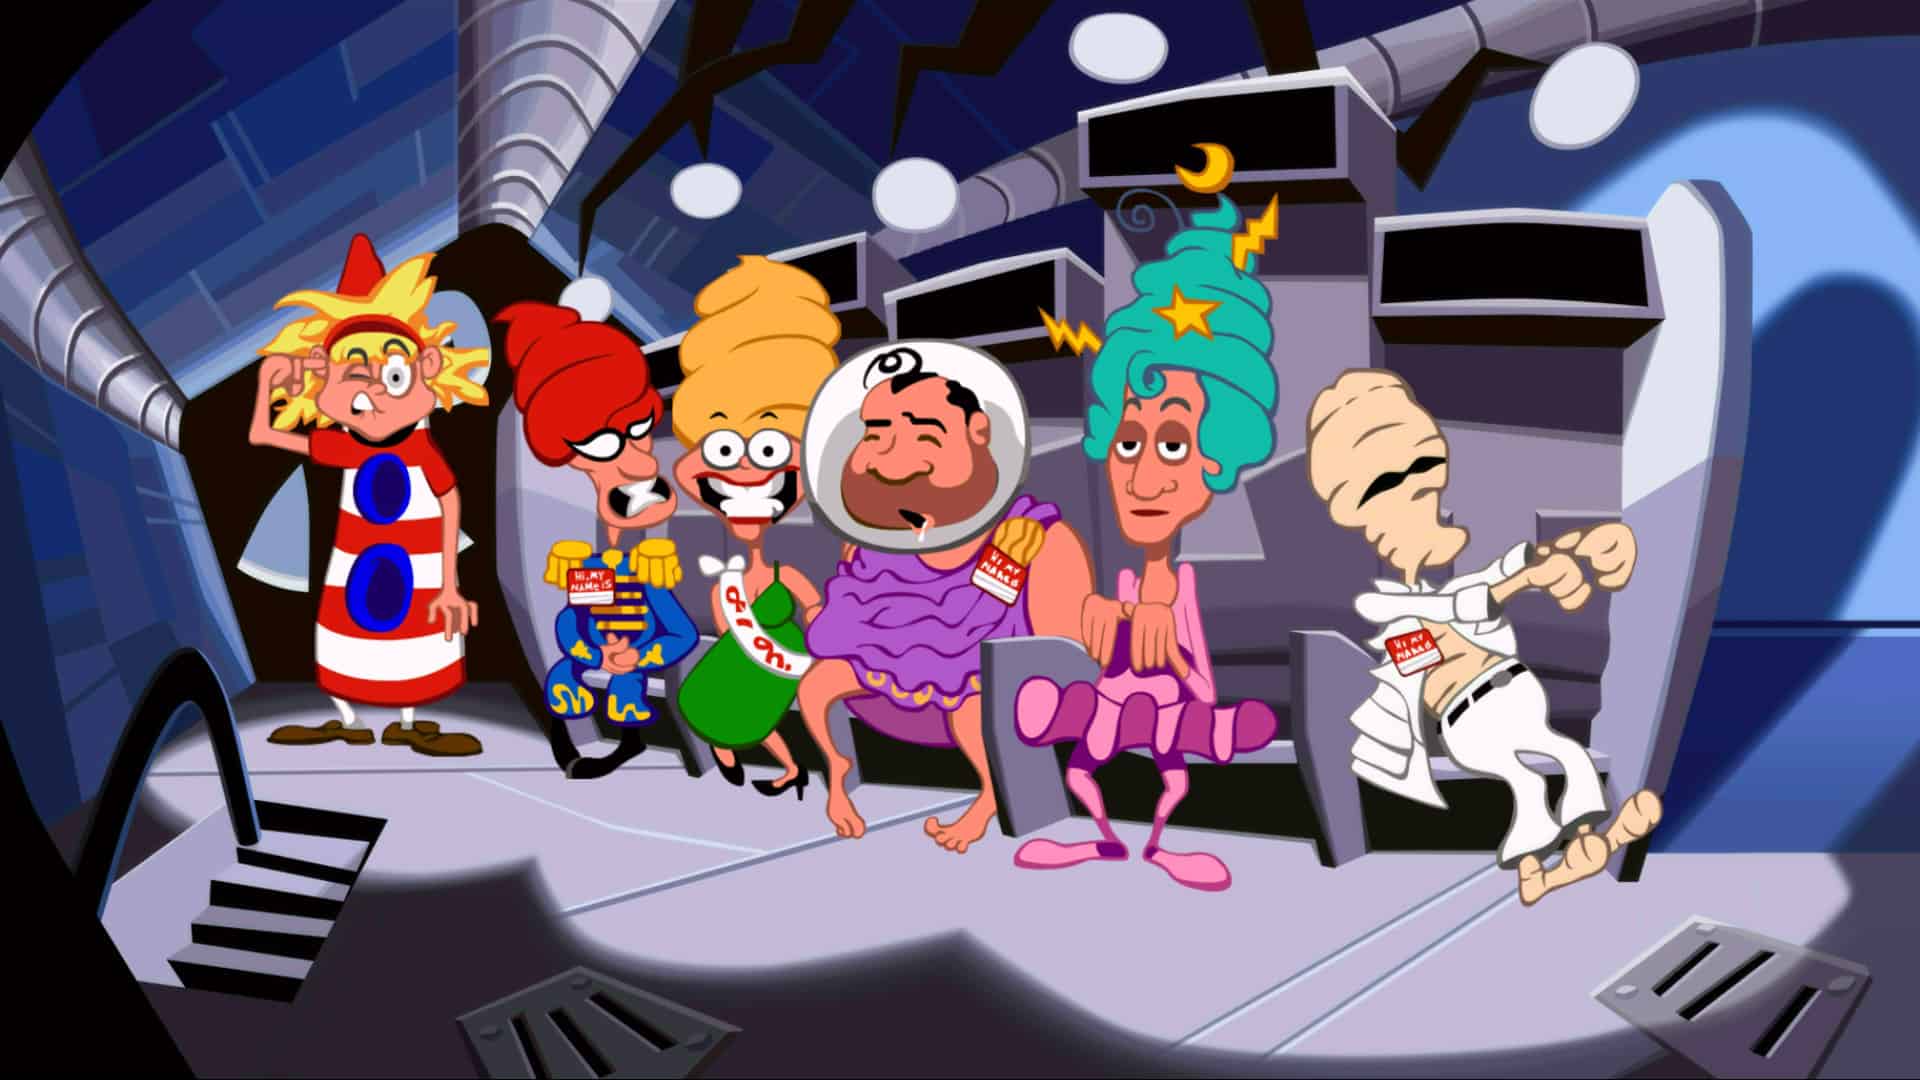 A Steam promotional image for Day of the Tentacle Remastered.